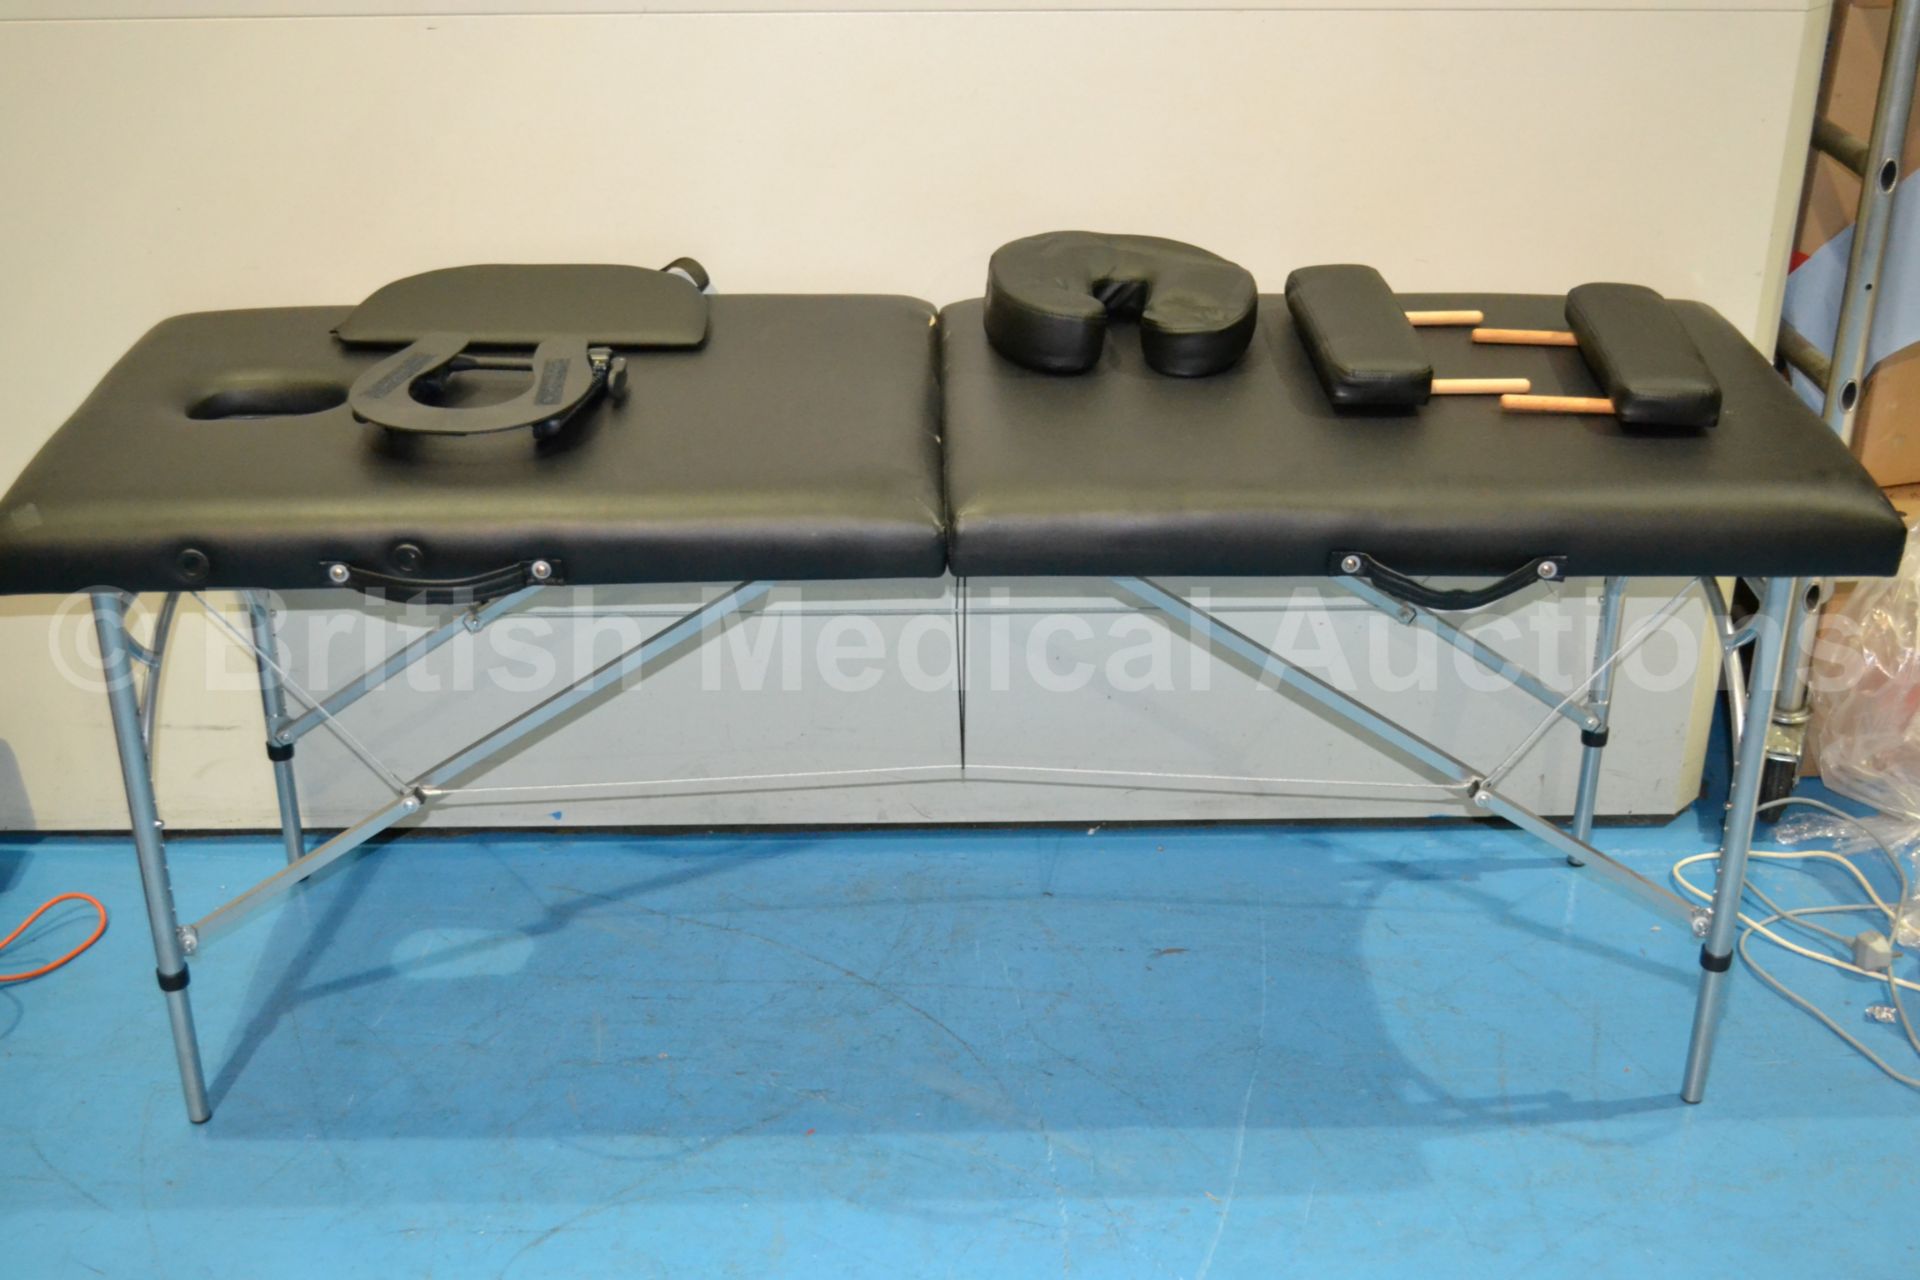 Foldable Patient Examination Couch With Accessorie - Image 3 of 4